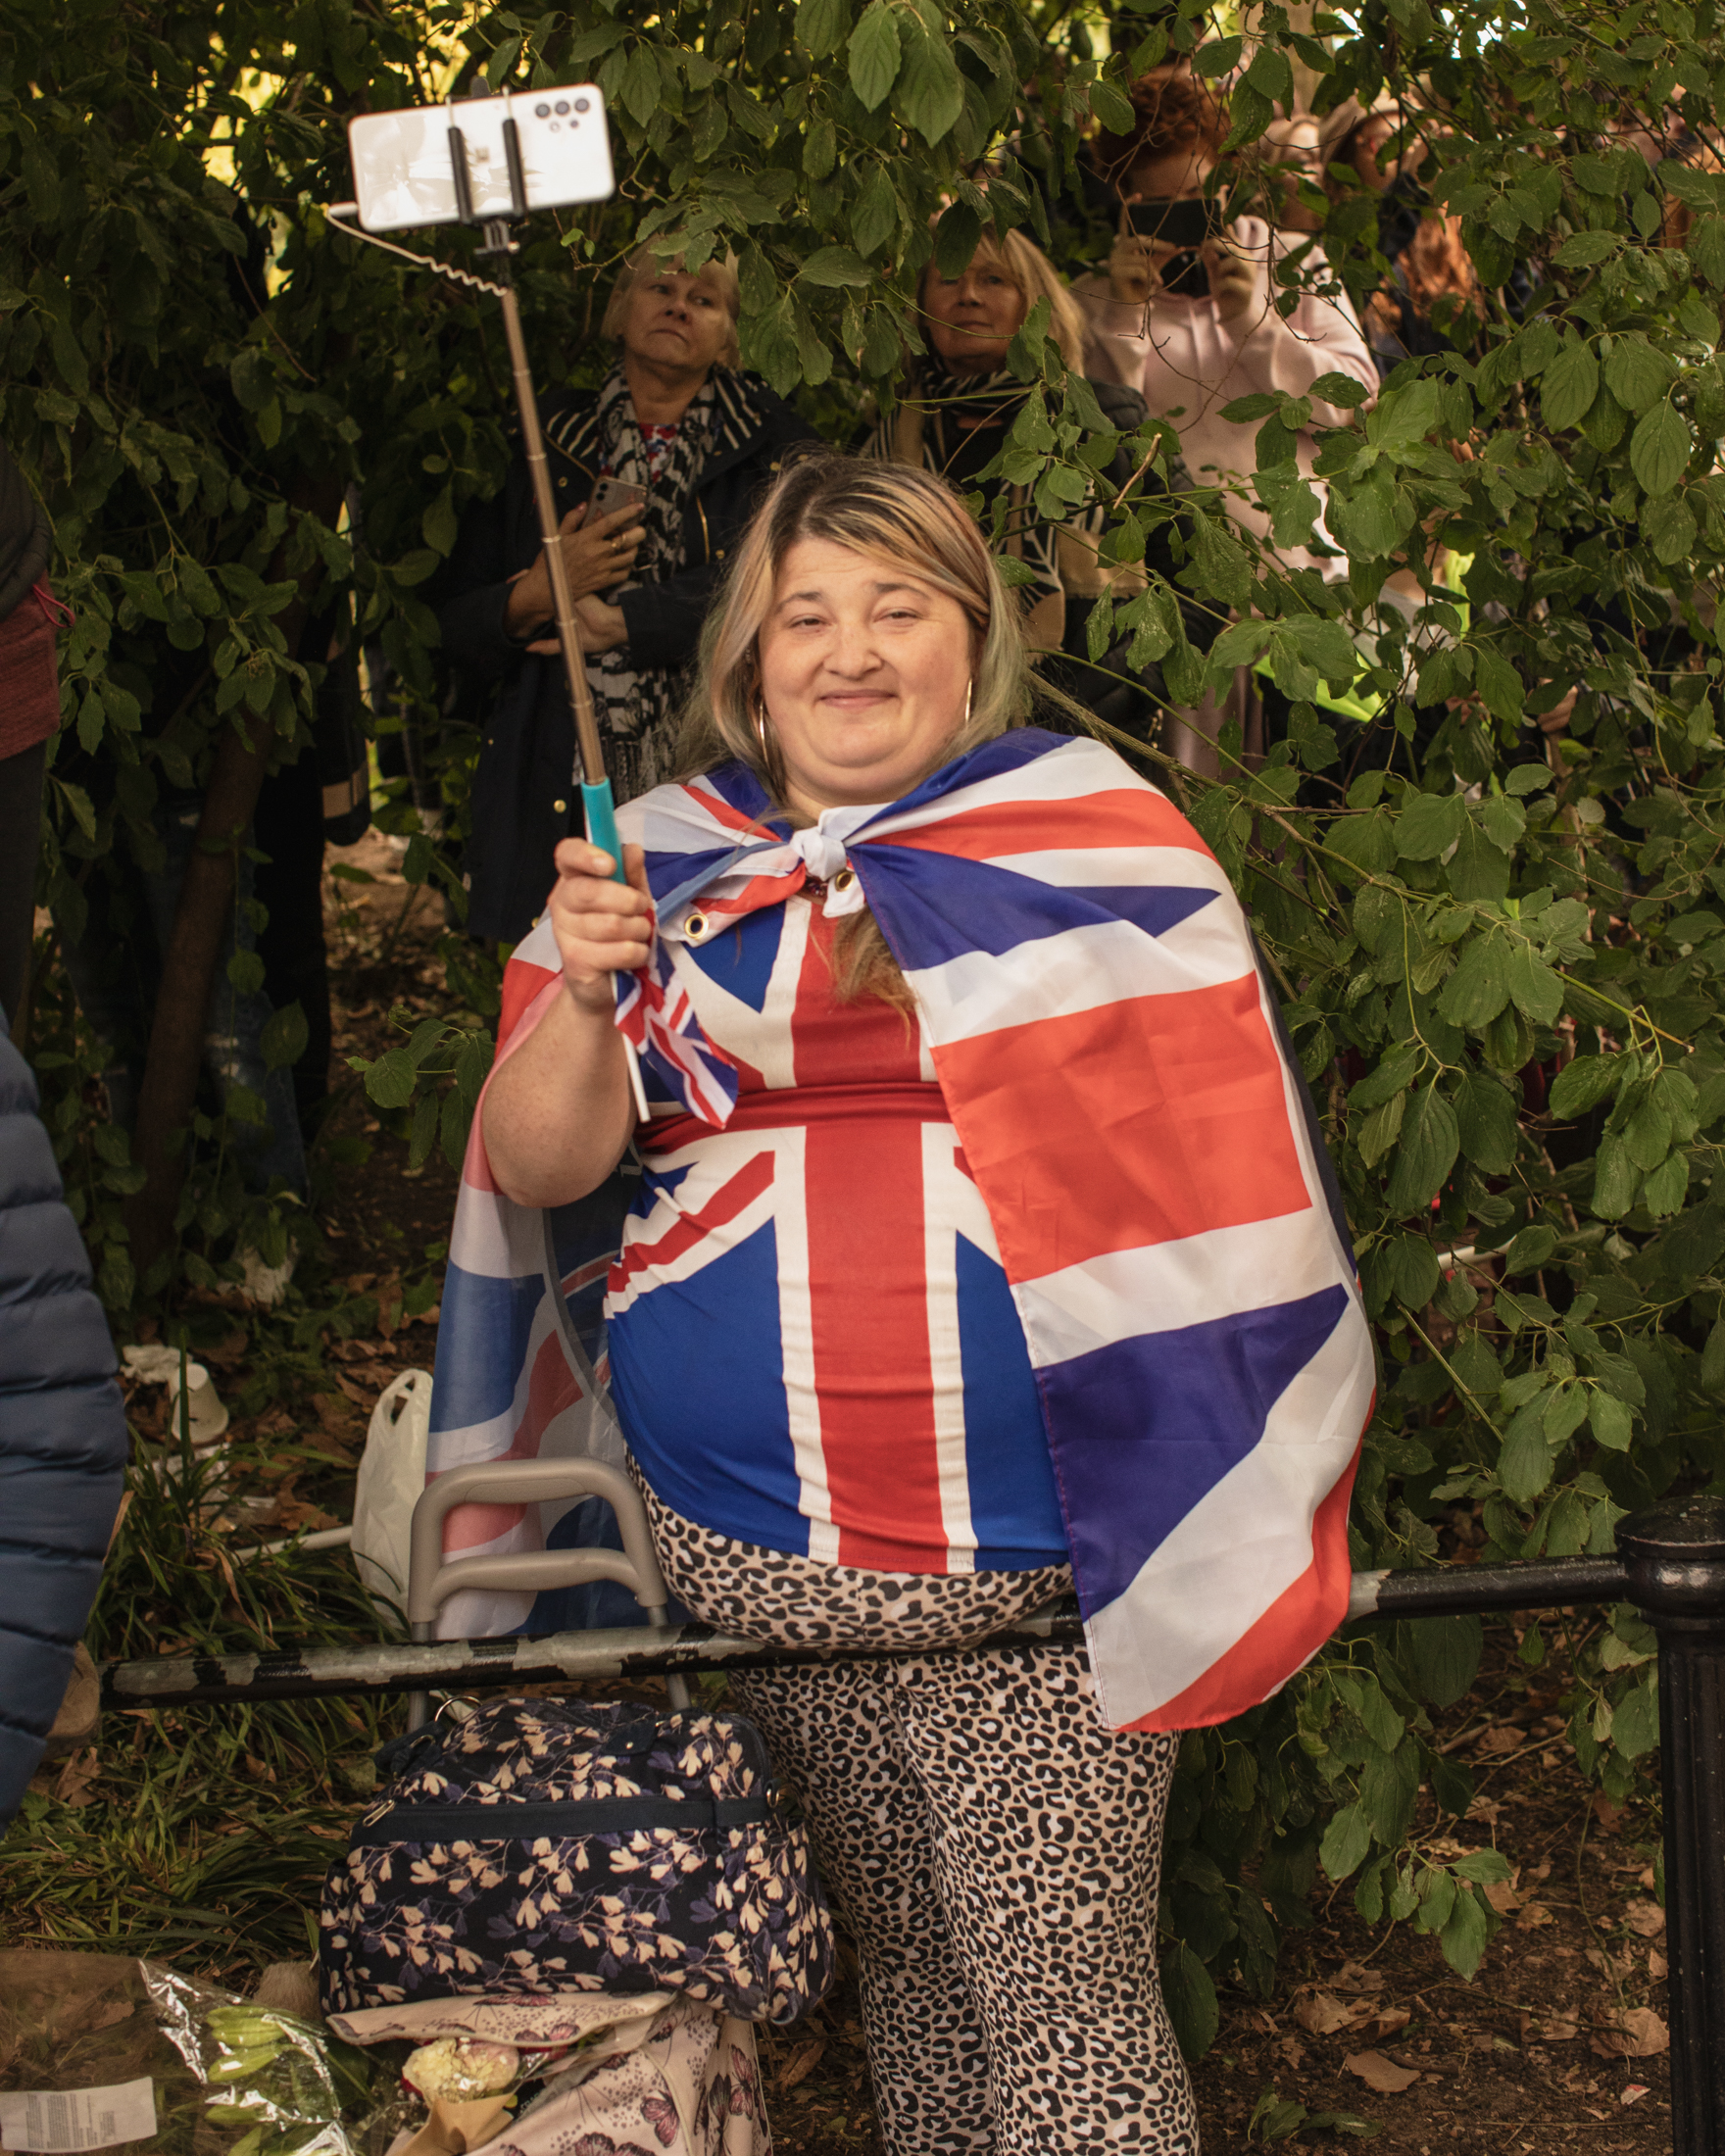 Woman wrapped in Union Jack flag during Queen Elizabeth II's funeral